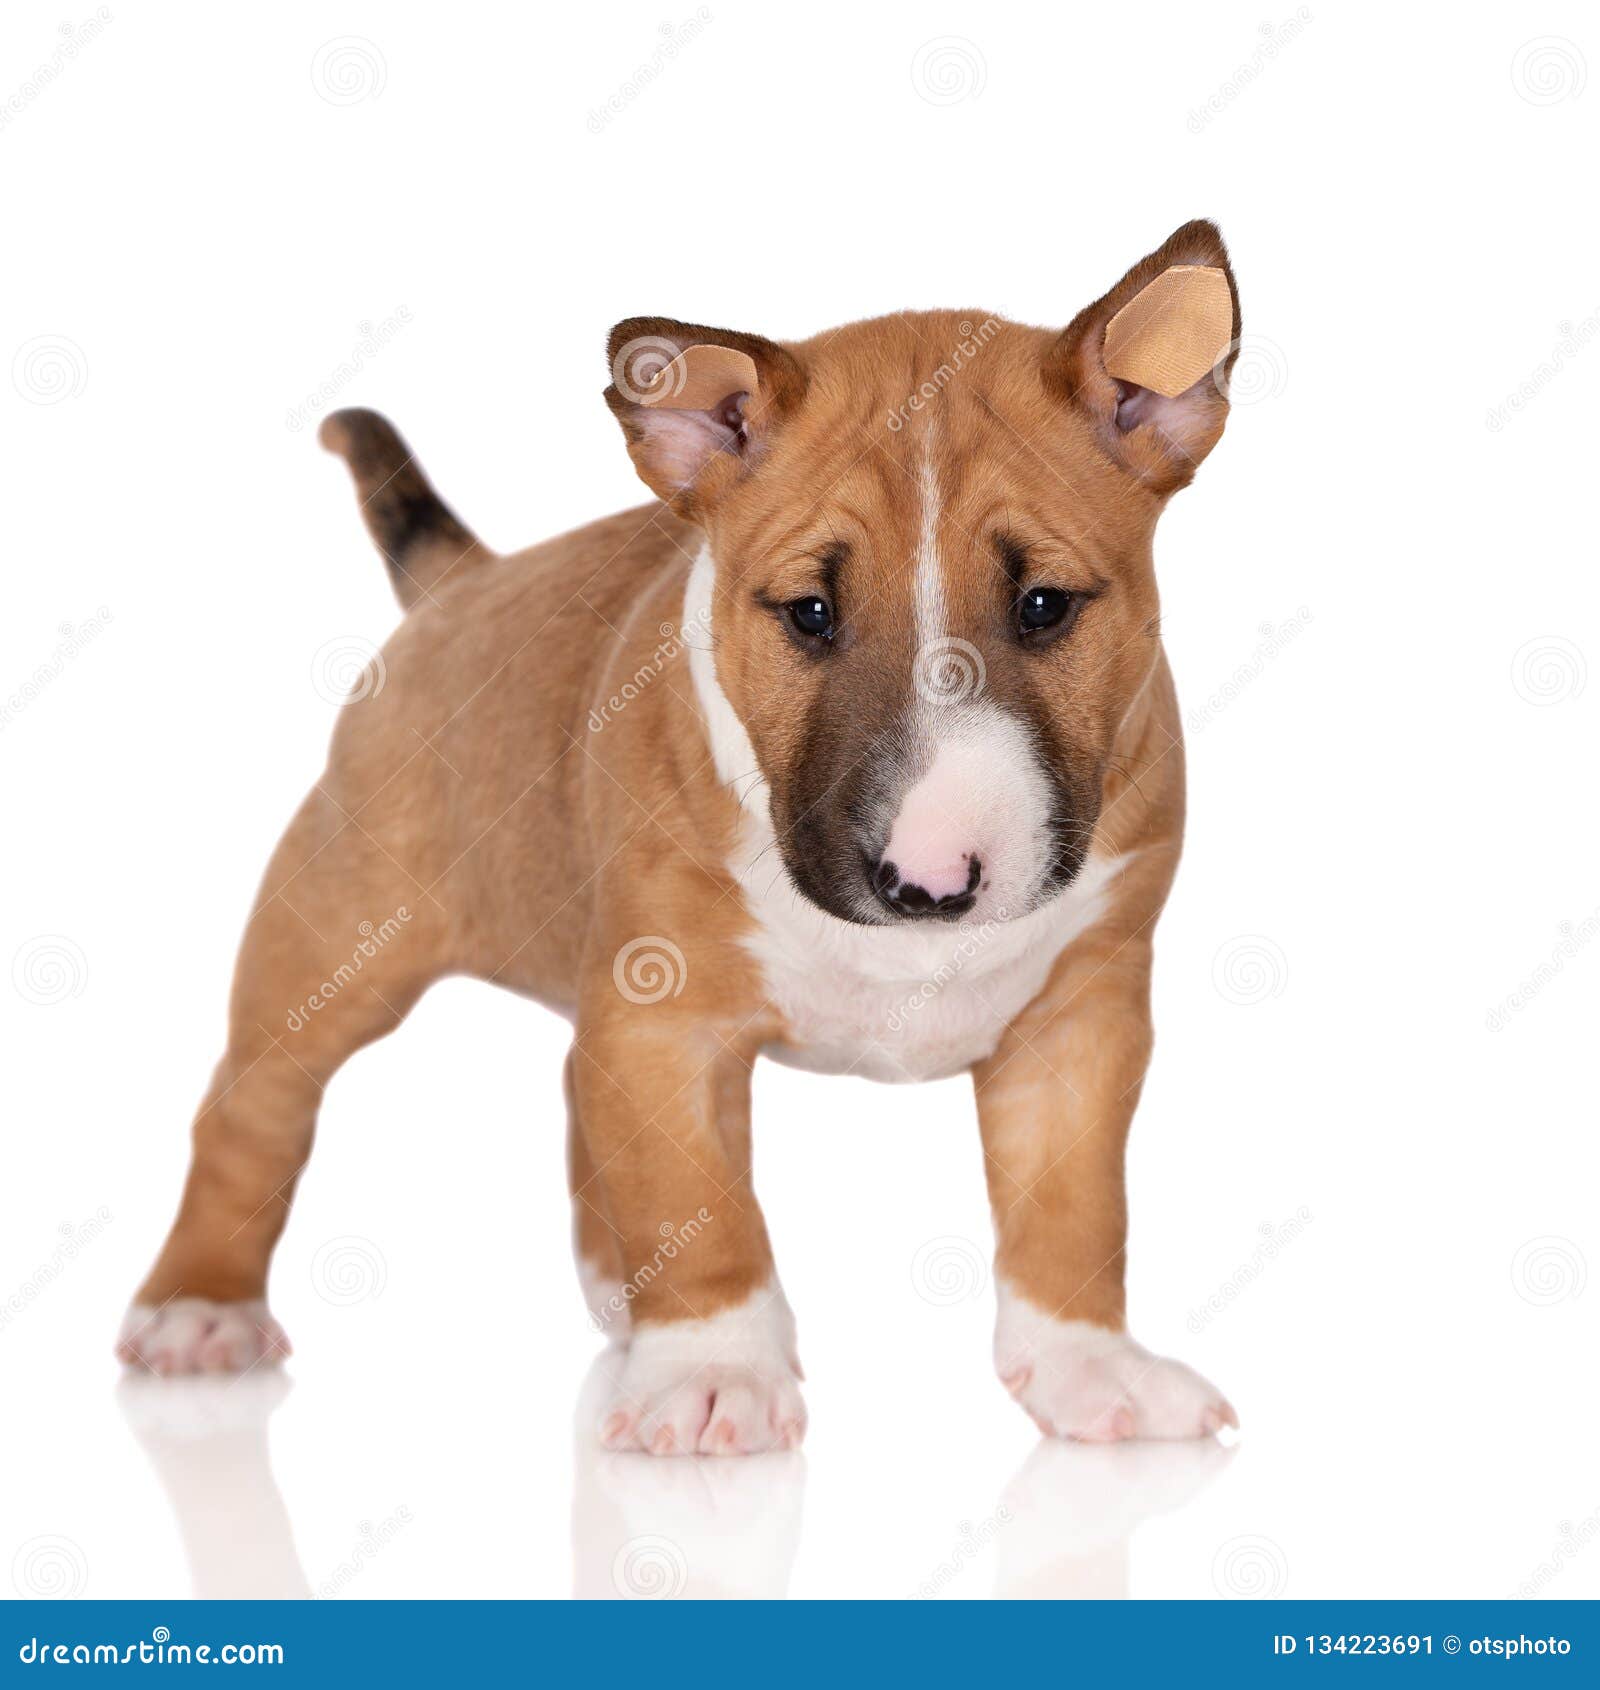 Miniature Bull Terrier Puppy on White Background Stock Image - Image of bull, baby: